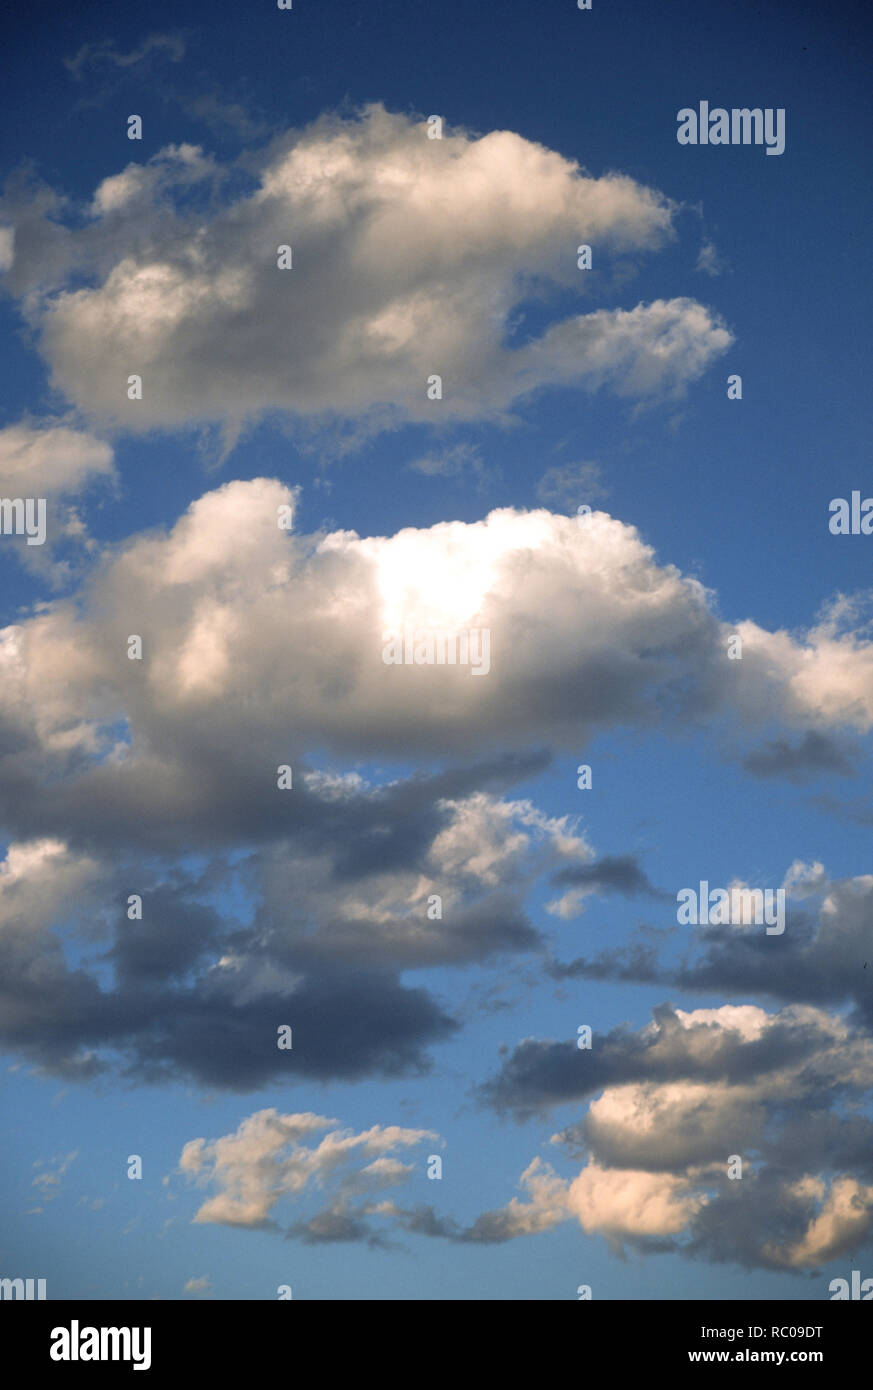 Puffy white clouds in a blue sky Stock Photo